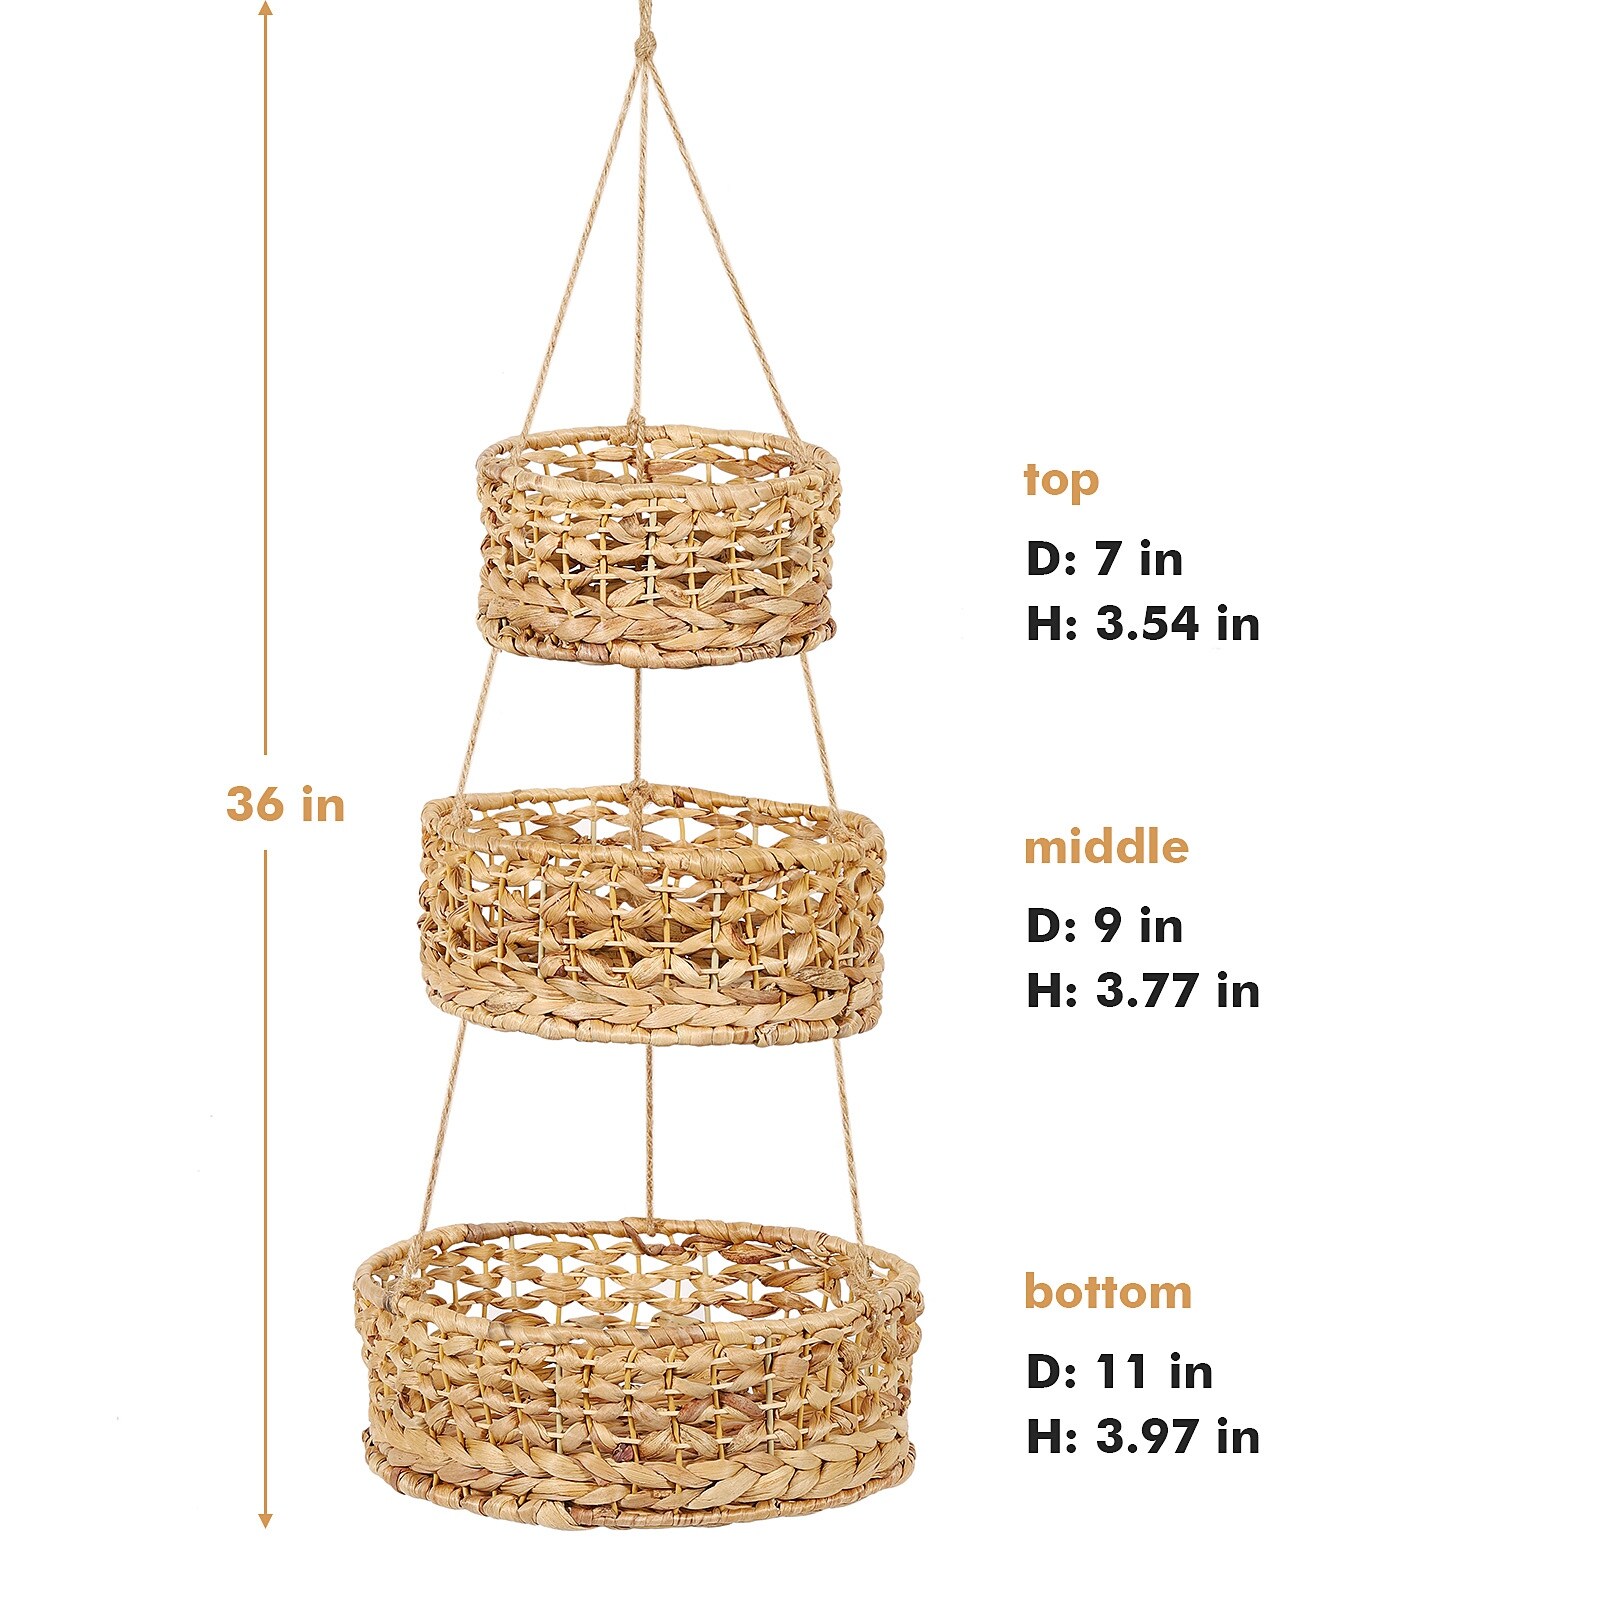 3 Tier Hanging Fruit Basket for Kitchen, Handmade Natural Woven Wicker  Seagrass Hanging Basket for Fruit and Vegetable Countertop Organizer,  Modern